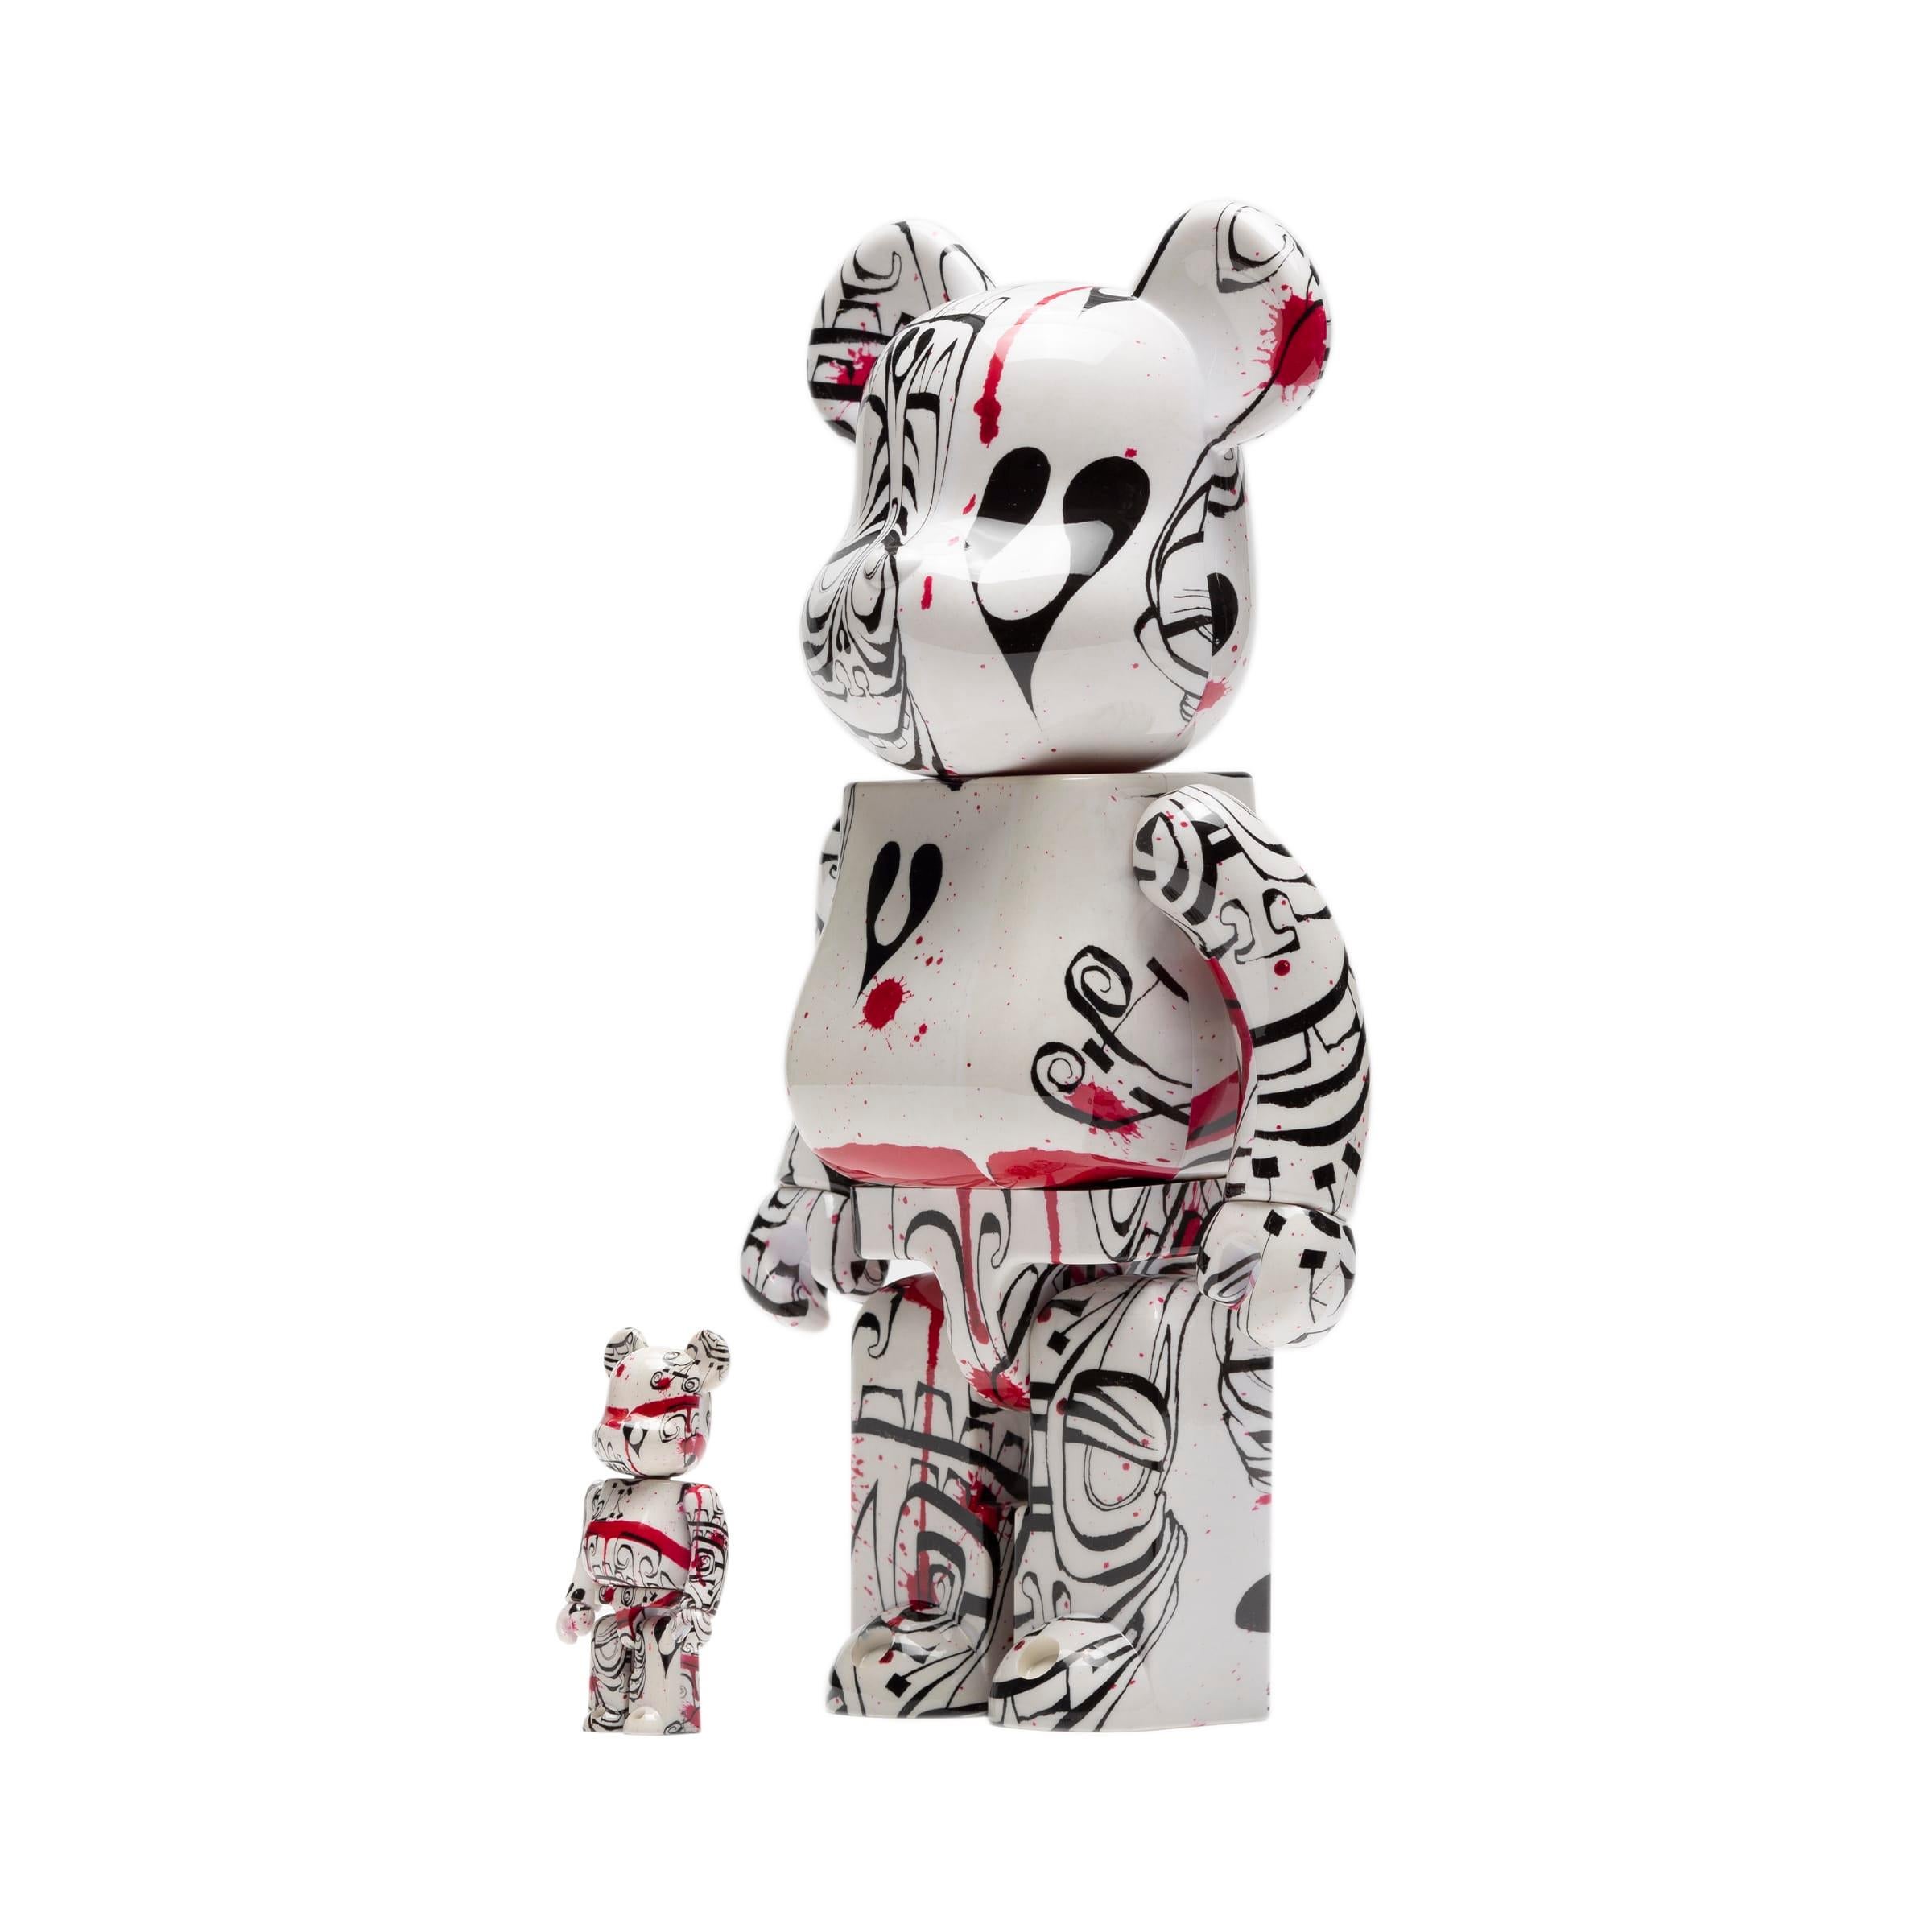 BEARBRICK: PHIL FROST 400% & 100% Medicom Toy Japan, Vinyl figure - Sculpture by (after) Andy Warhol